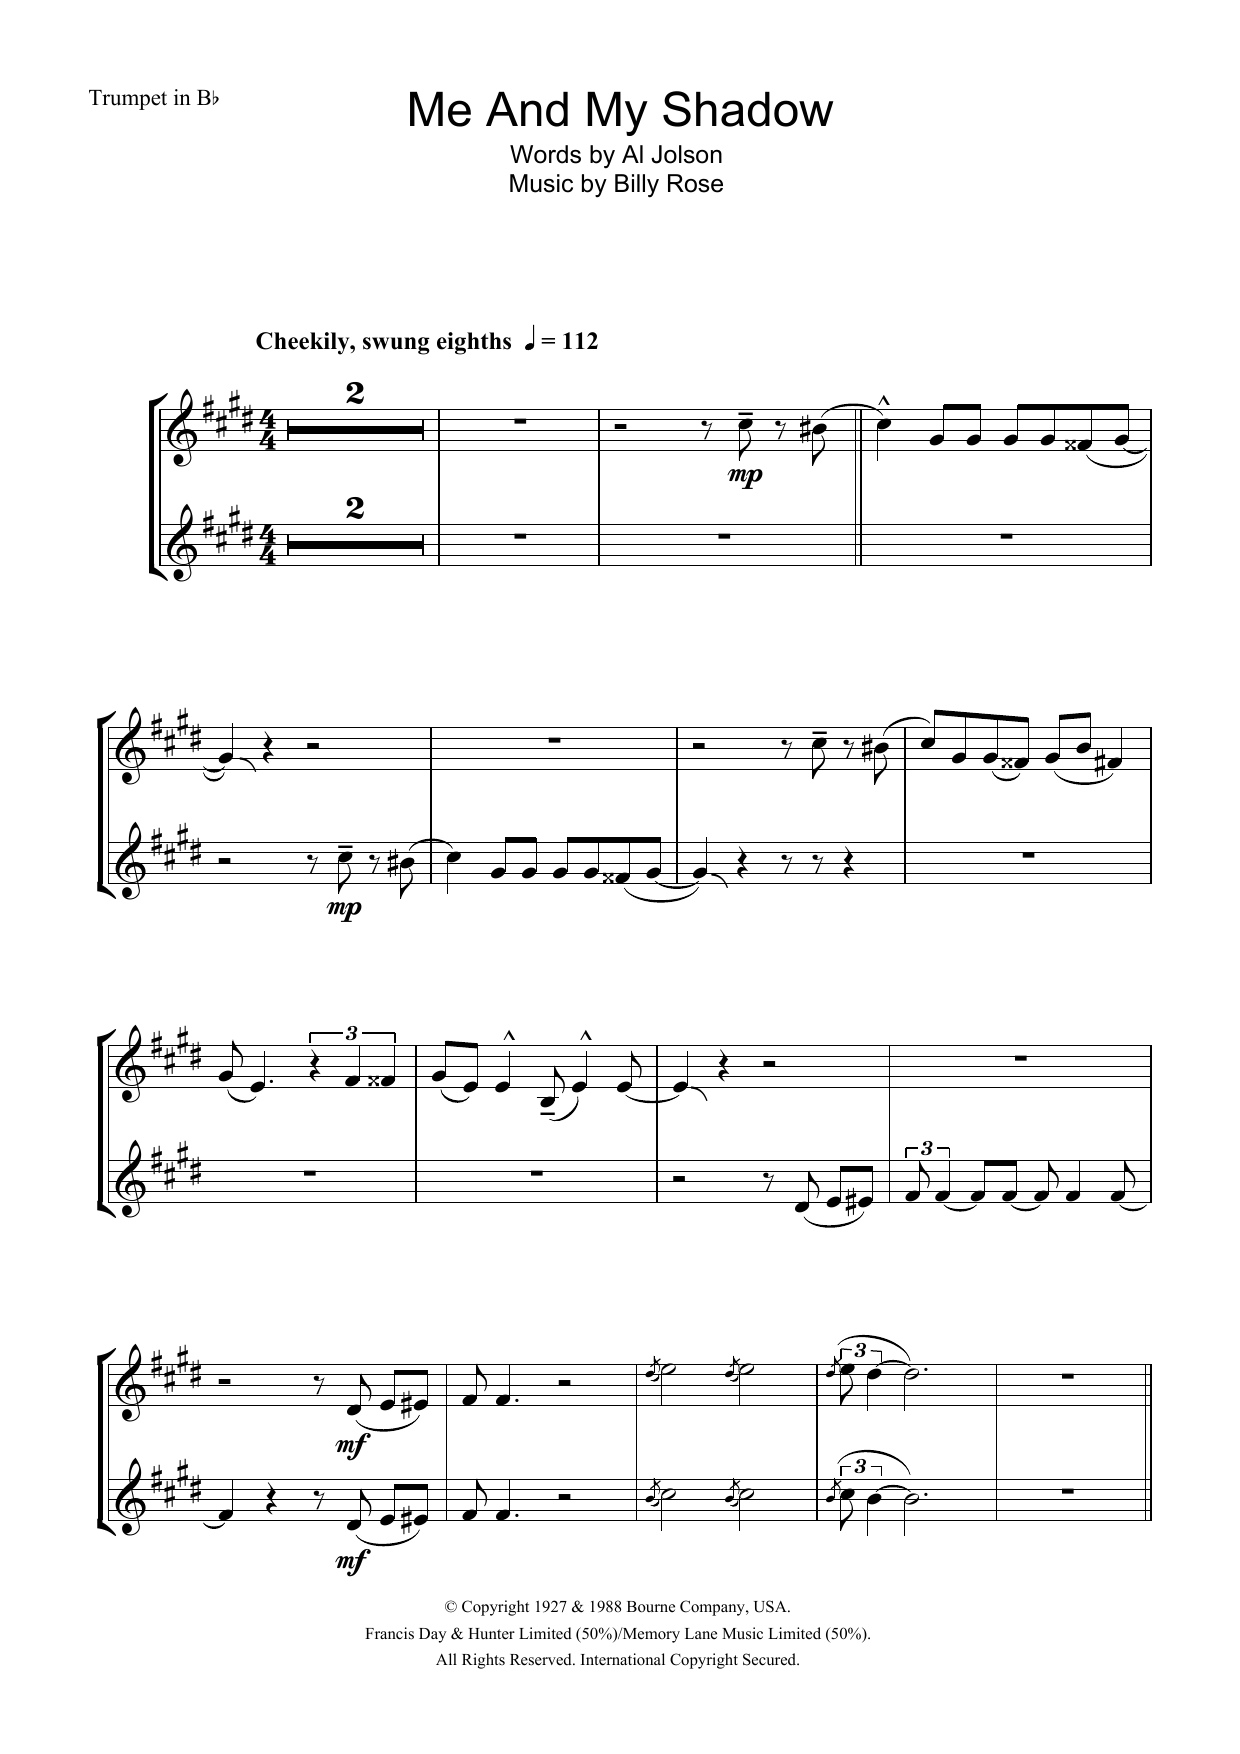 Download Frank Sinatra Me And My Shadow Sheet Music